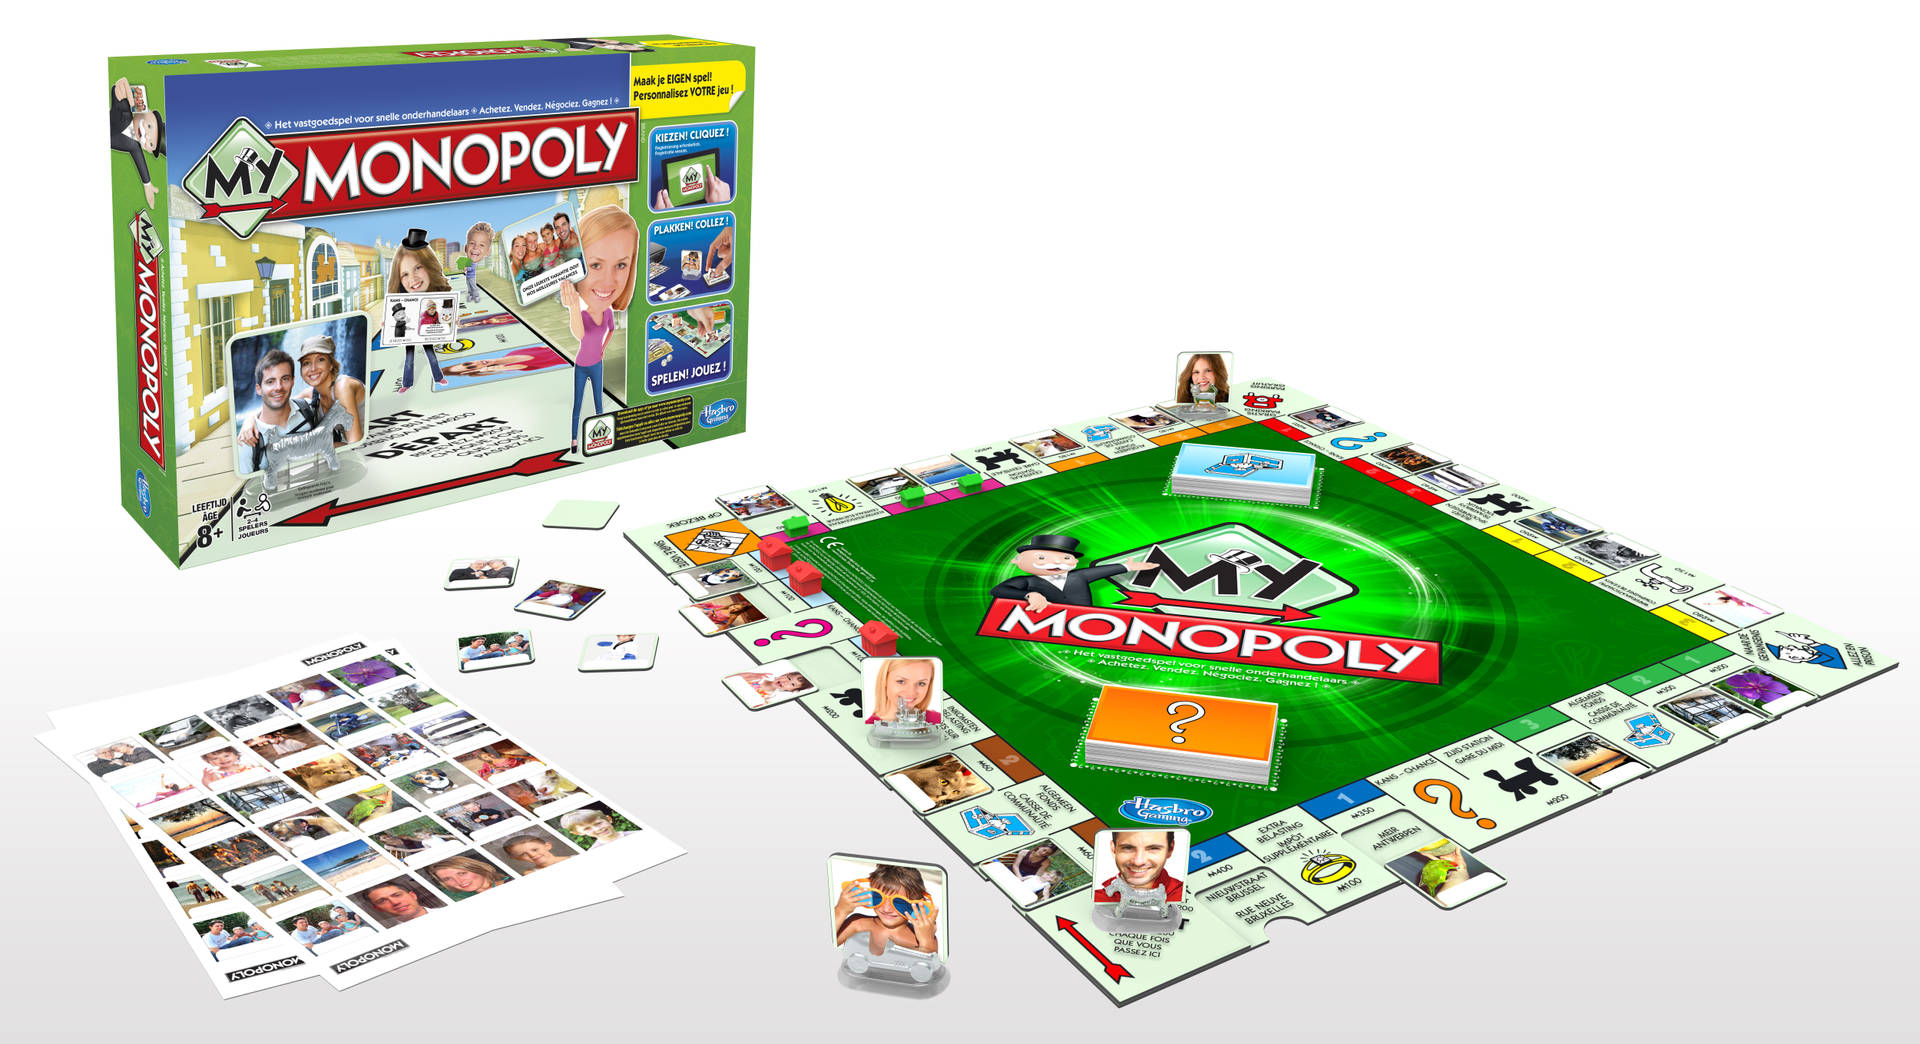 Monopoly Promotional Image